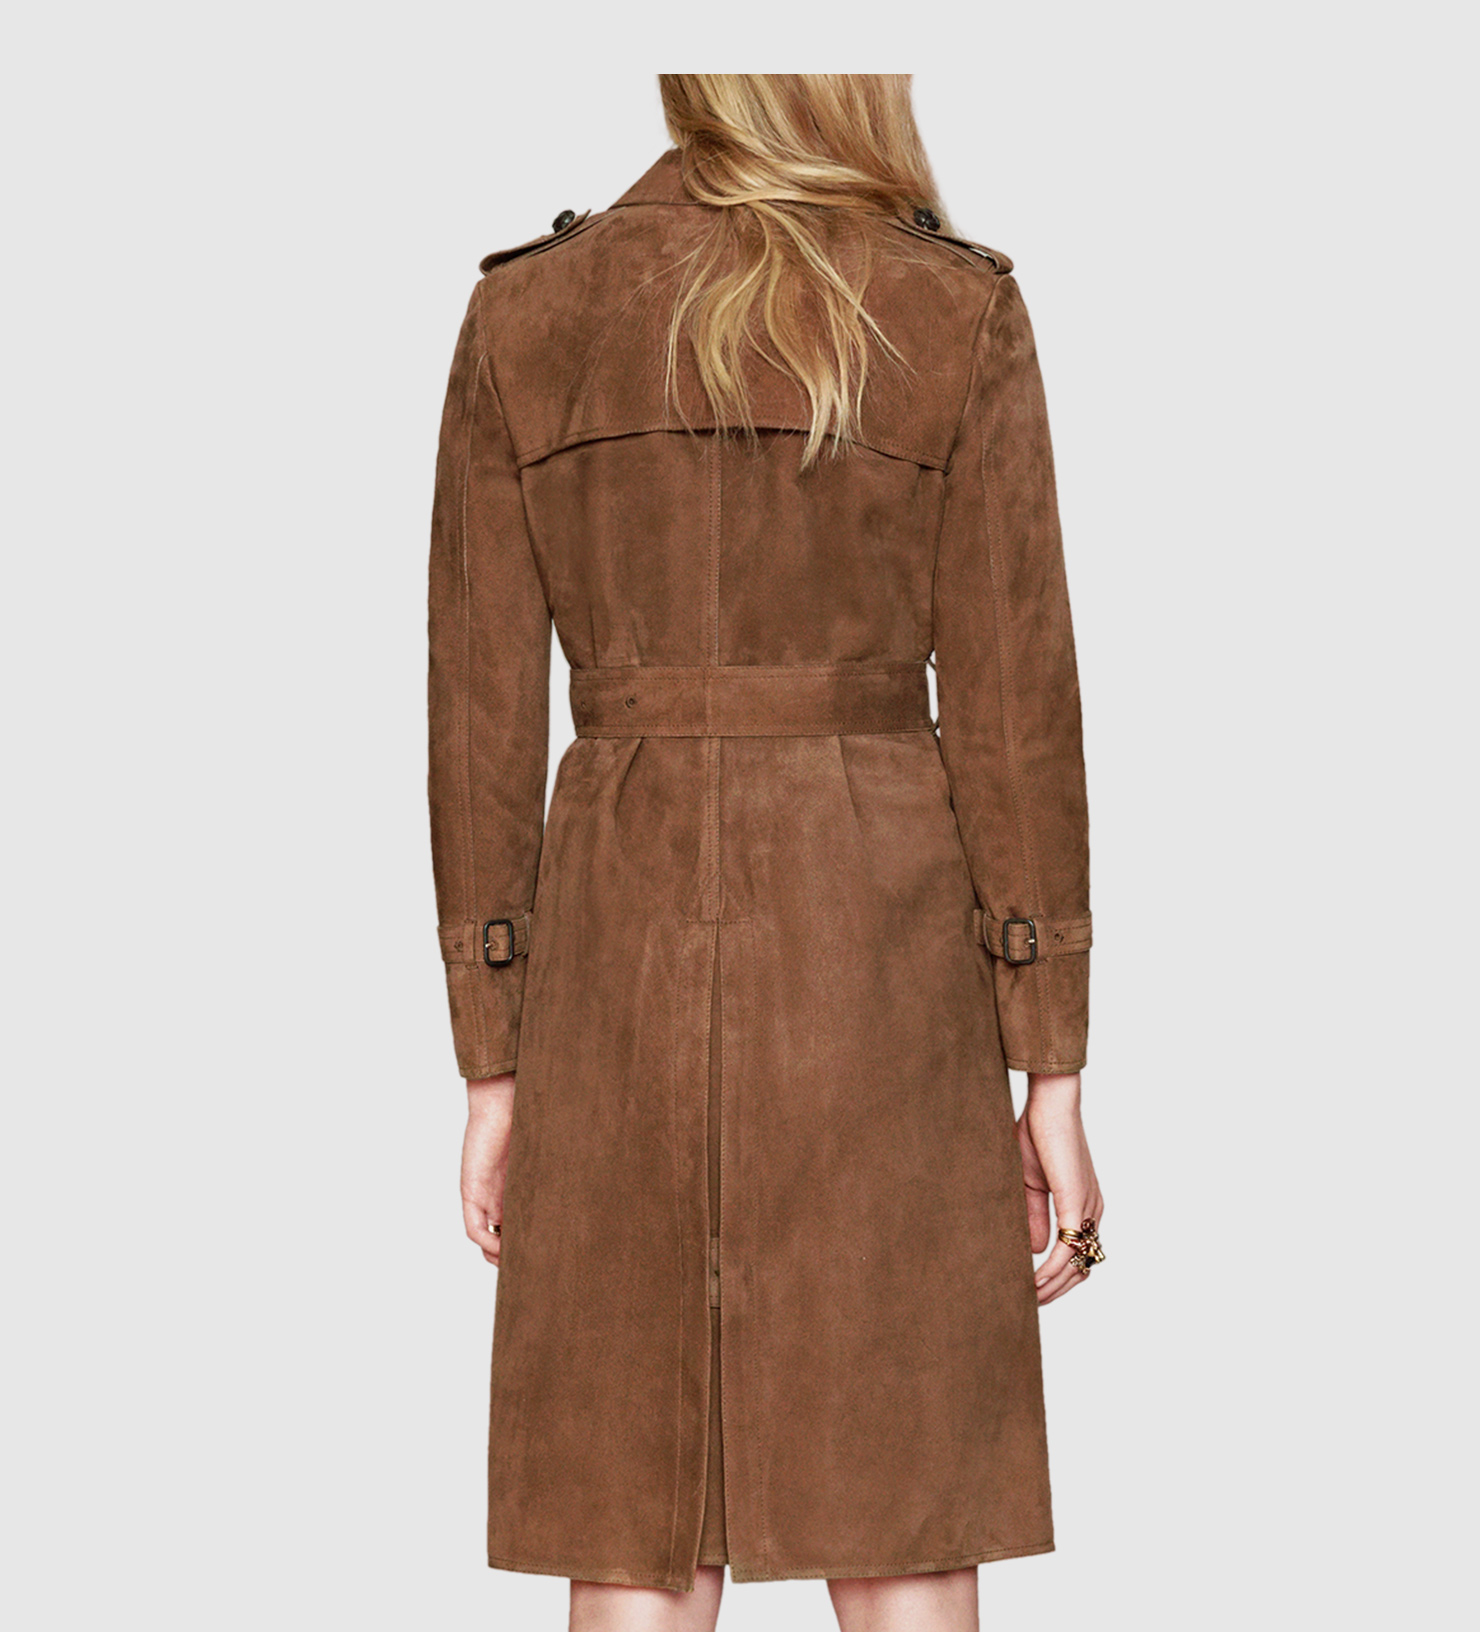 Gucci Suede Belted Trench Coat in Brown | Lyst